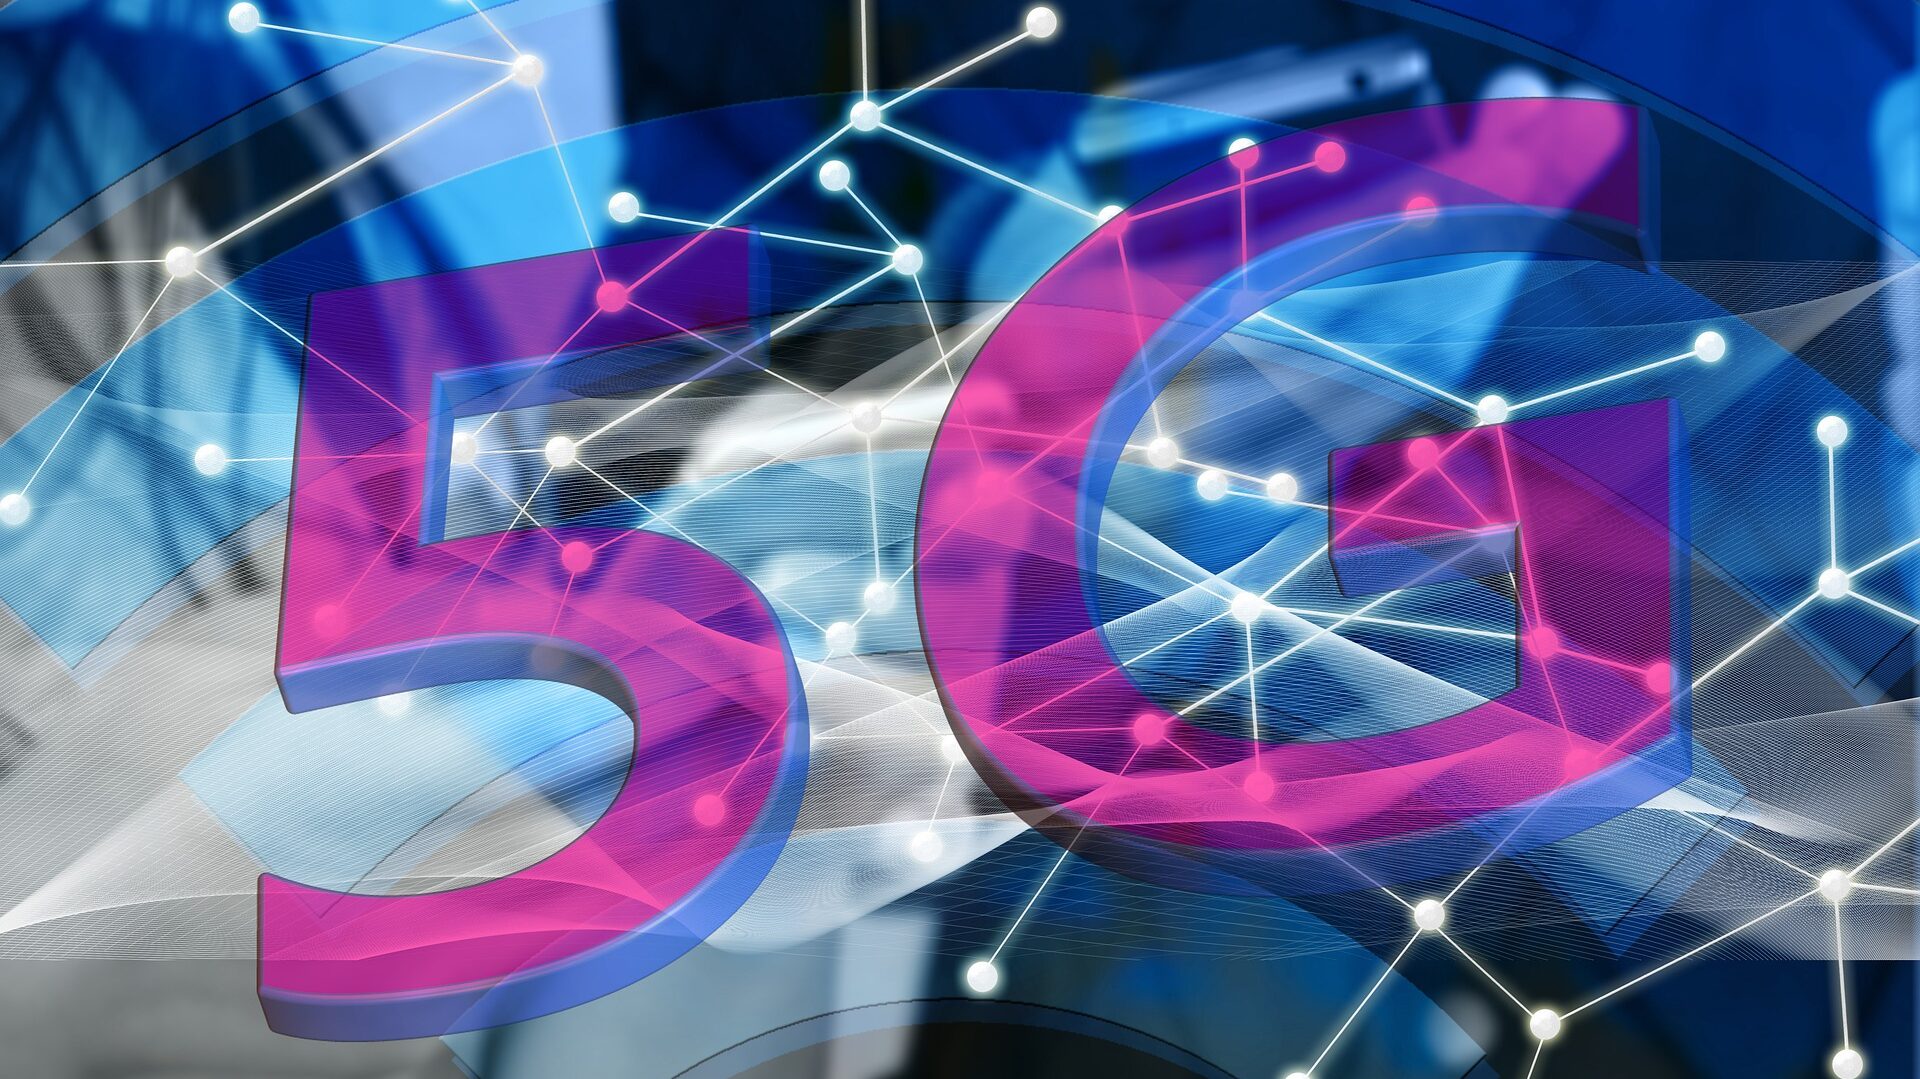 Revolutionary Era of 5G Technology and its Applications